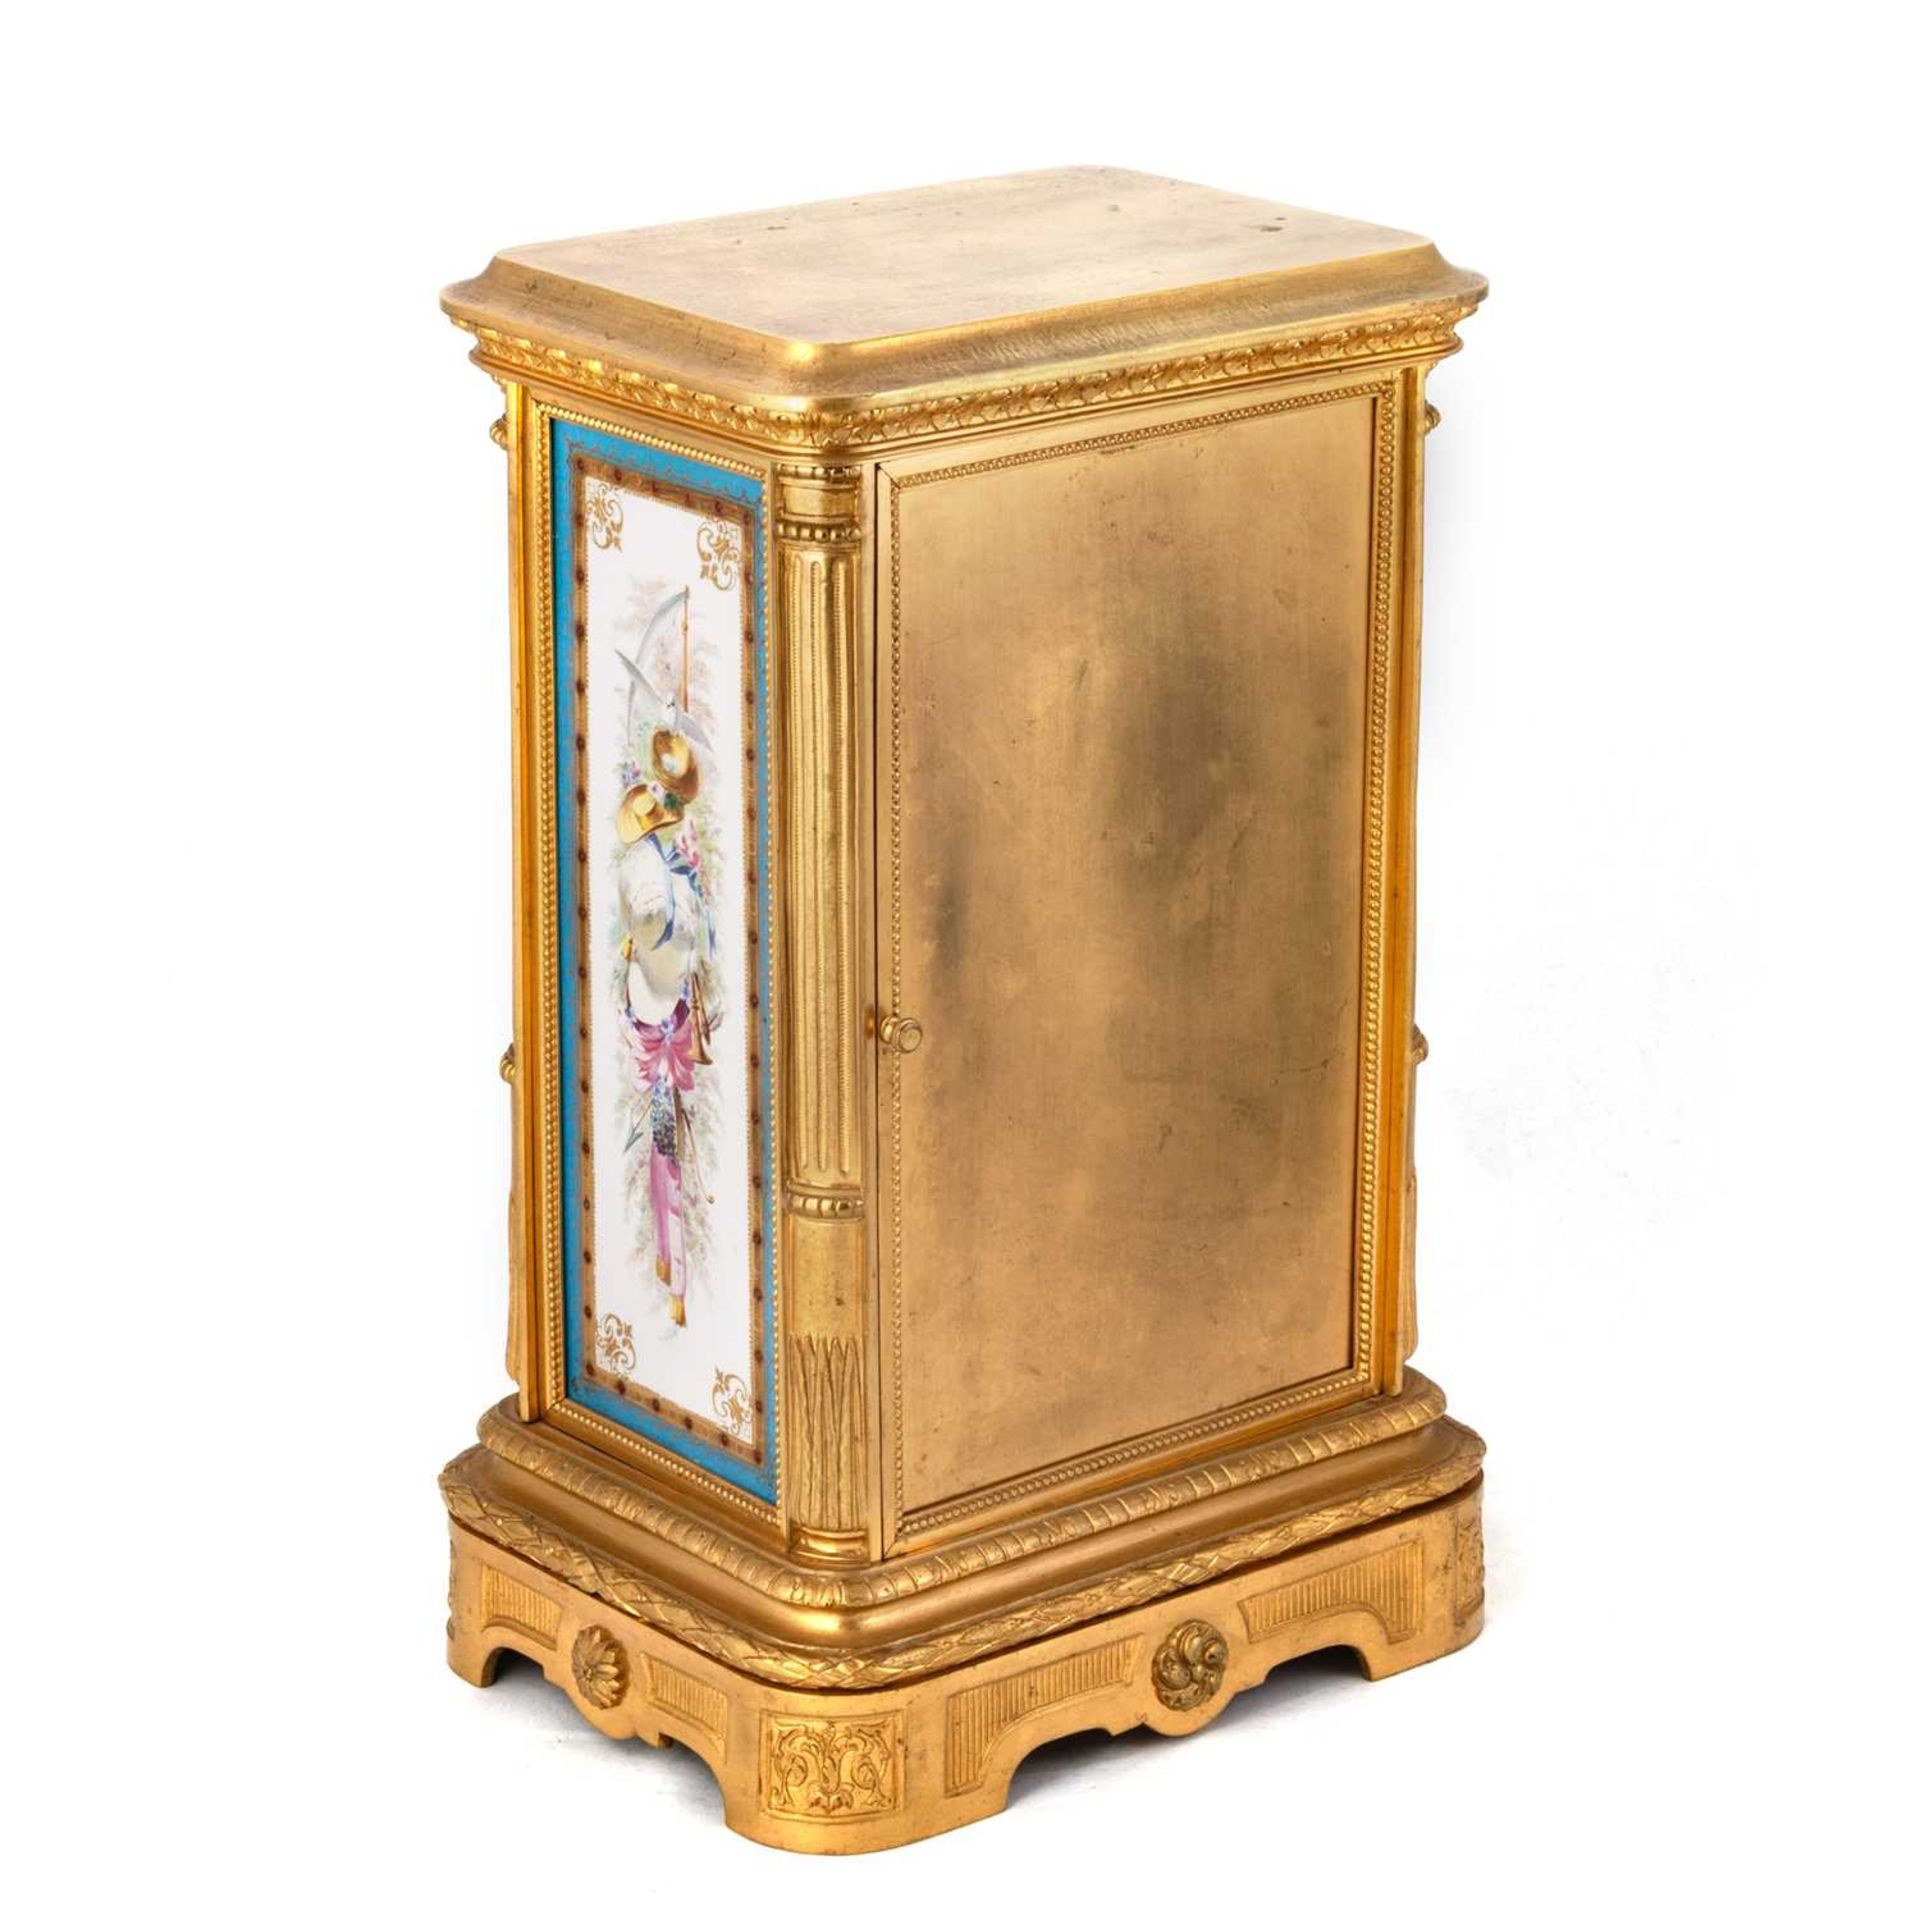 A LARGE FRENCH ORMOLU AND PORCELAIN TABLE CLOCK, CIRCA 1870, RETAILED BY TIFFANY & CO, NEW YORK - Image 3 of 3